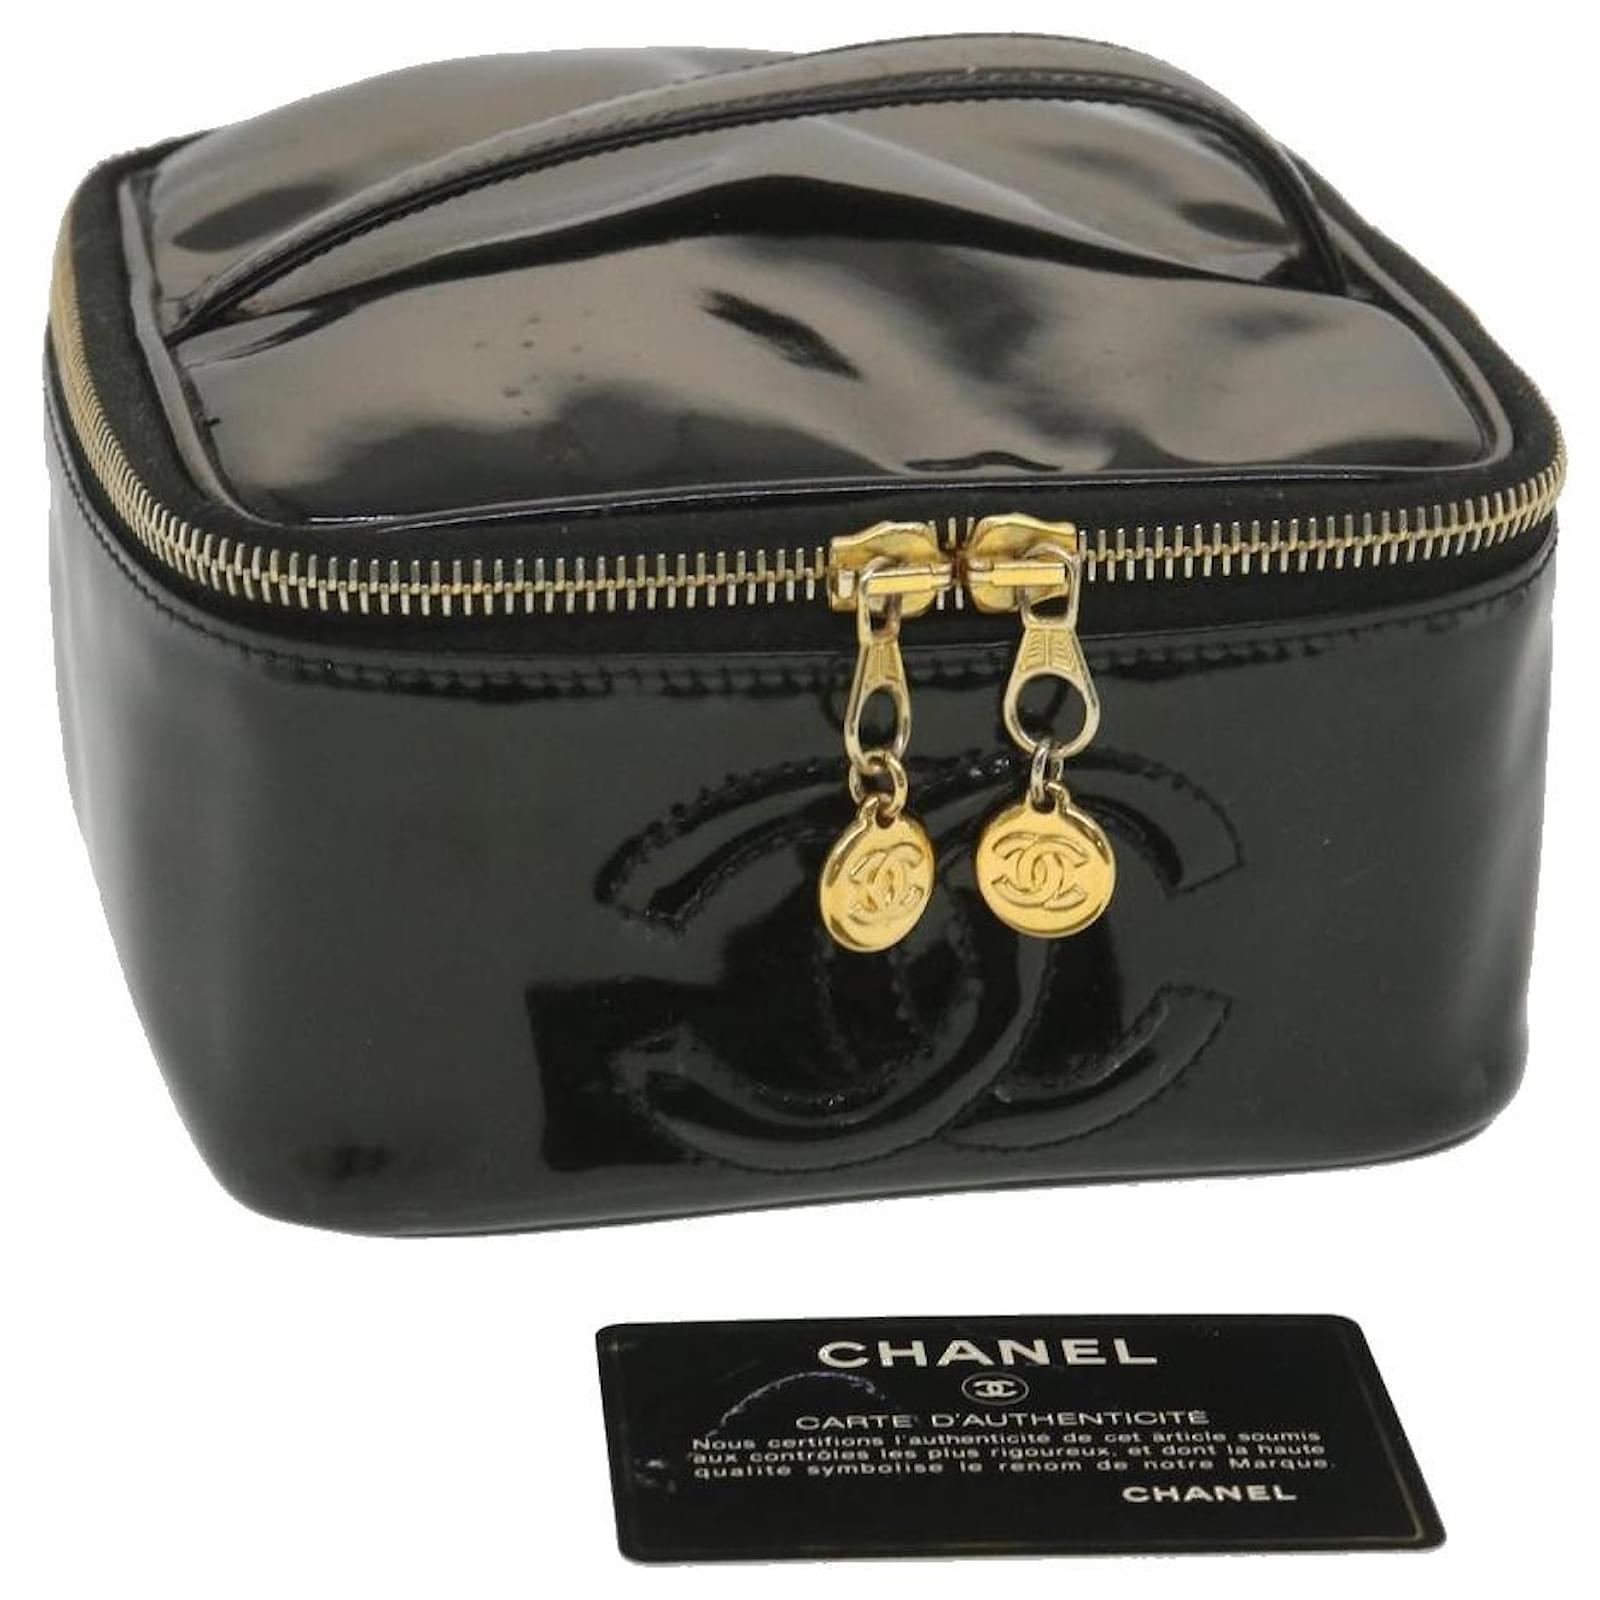 Chanel Vanity Cosmetic Pouch Patent Leather 2Way Black Cc Auth Bs5918